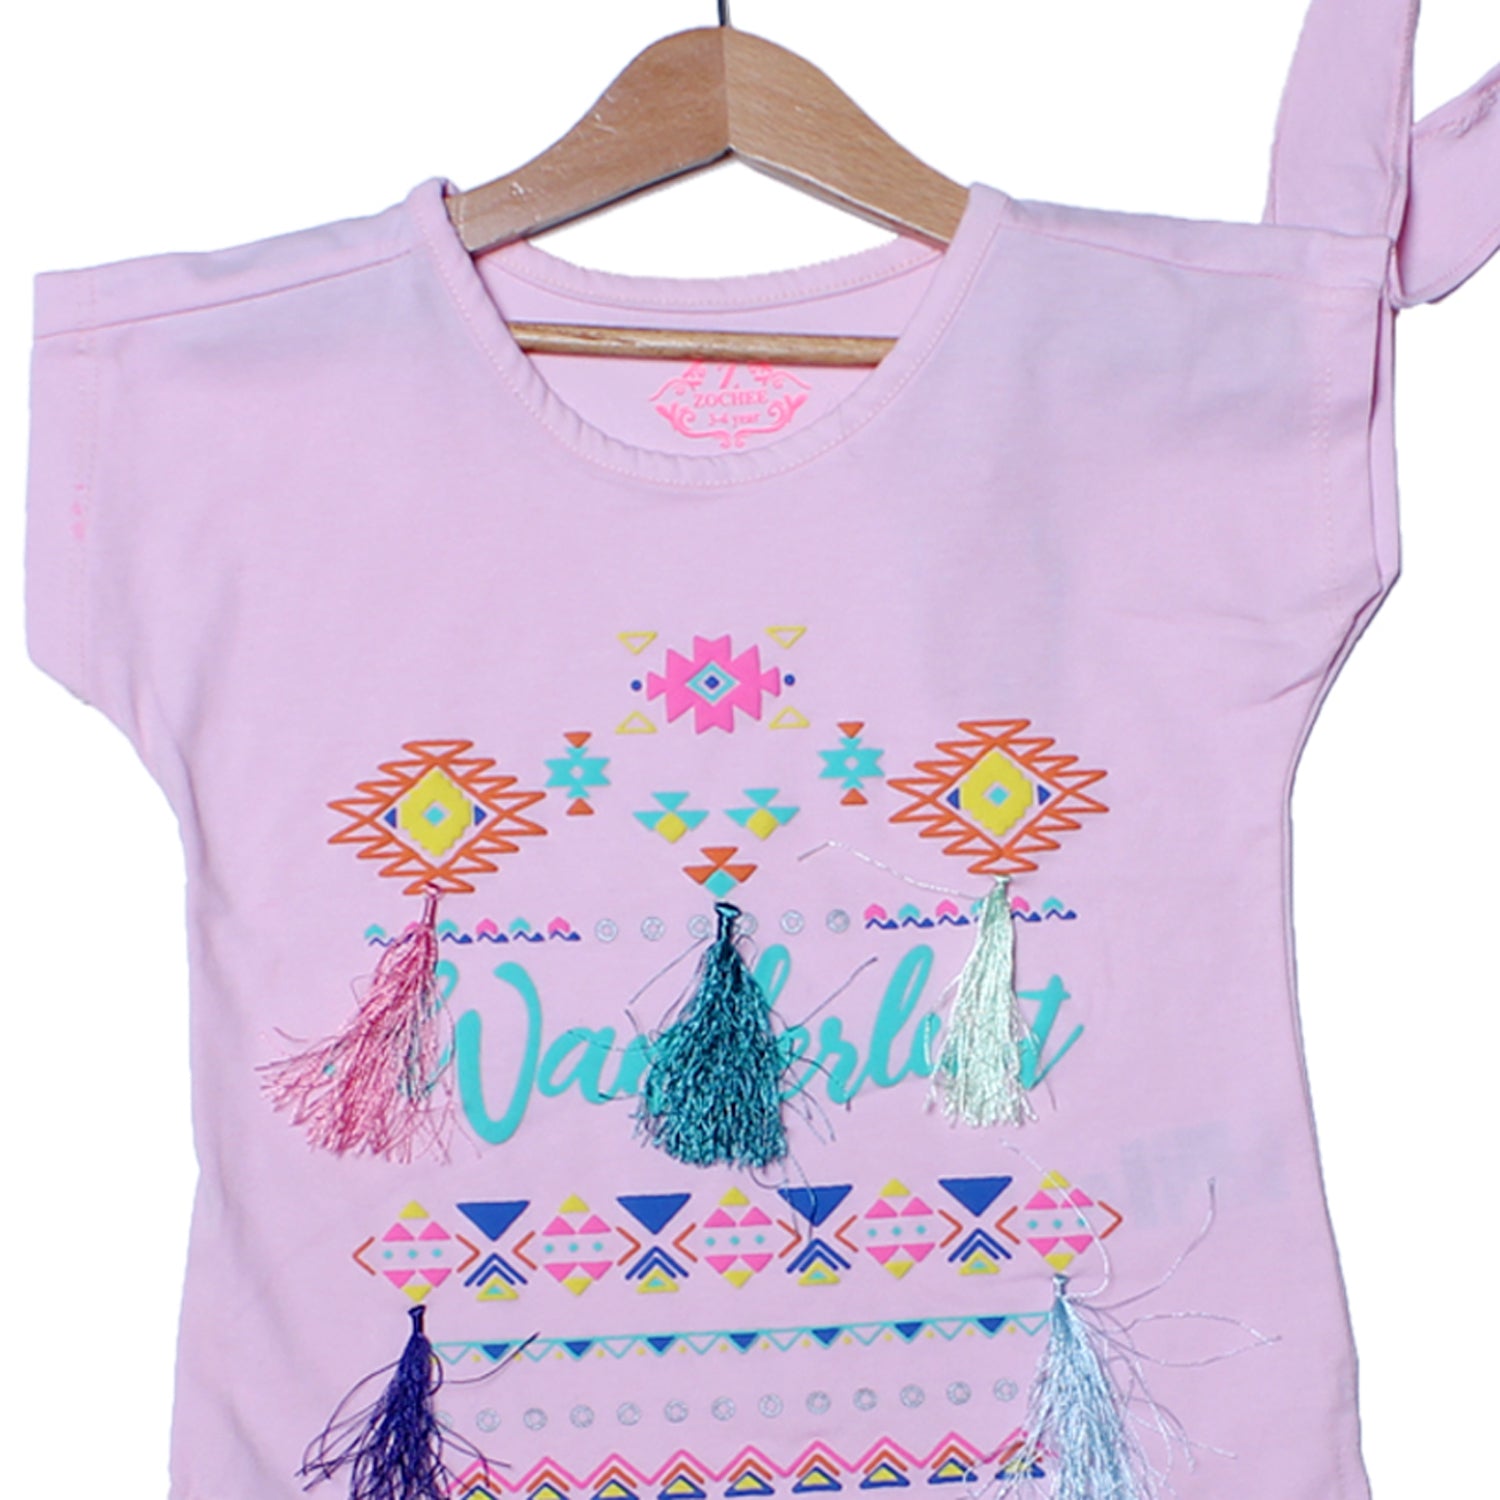 NEW PINK WANDERLUST PRINTED T-SHIRT TOP FOR GIRLS